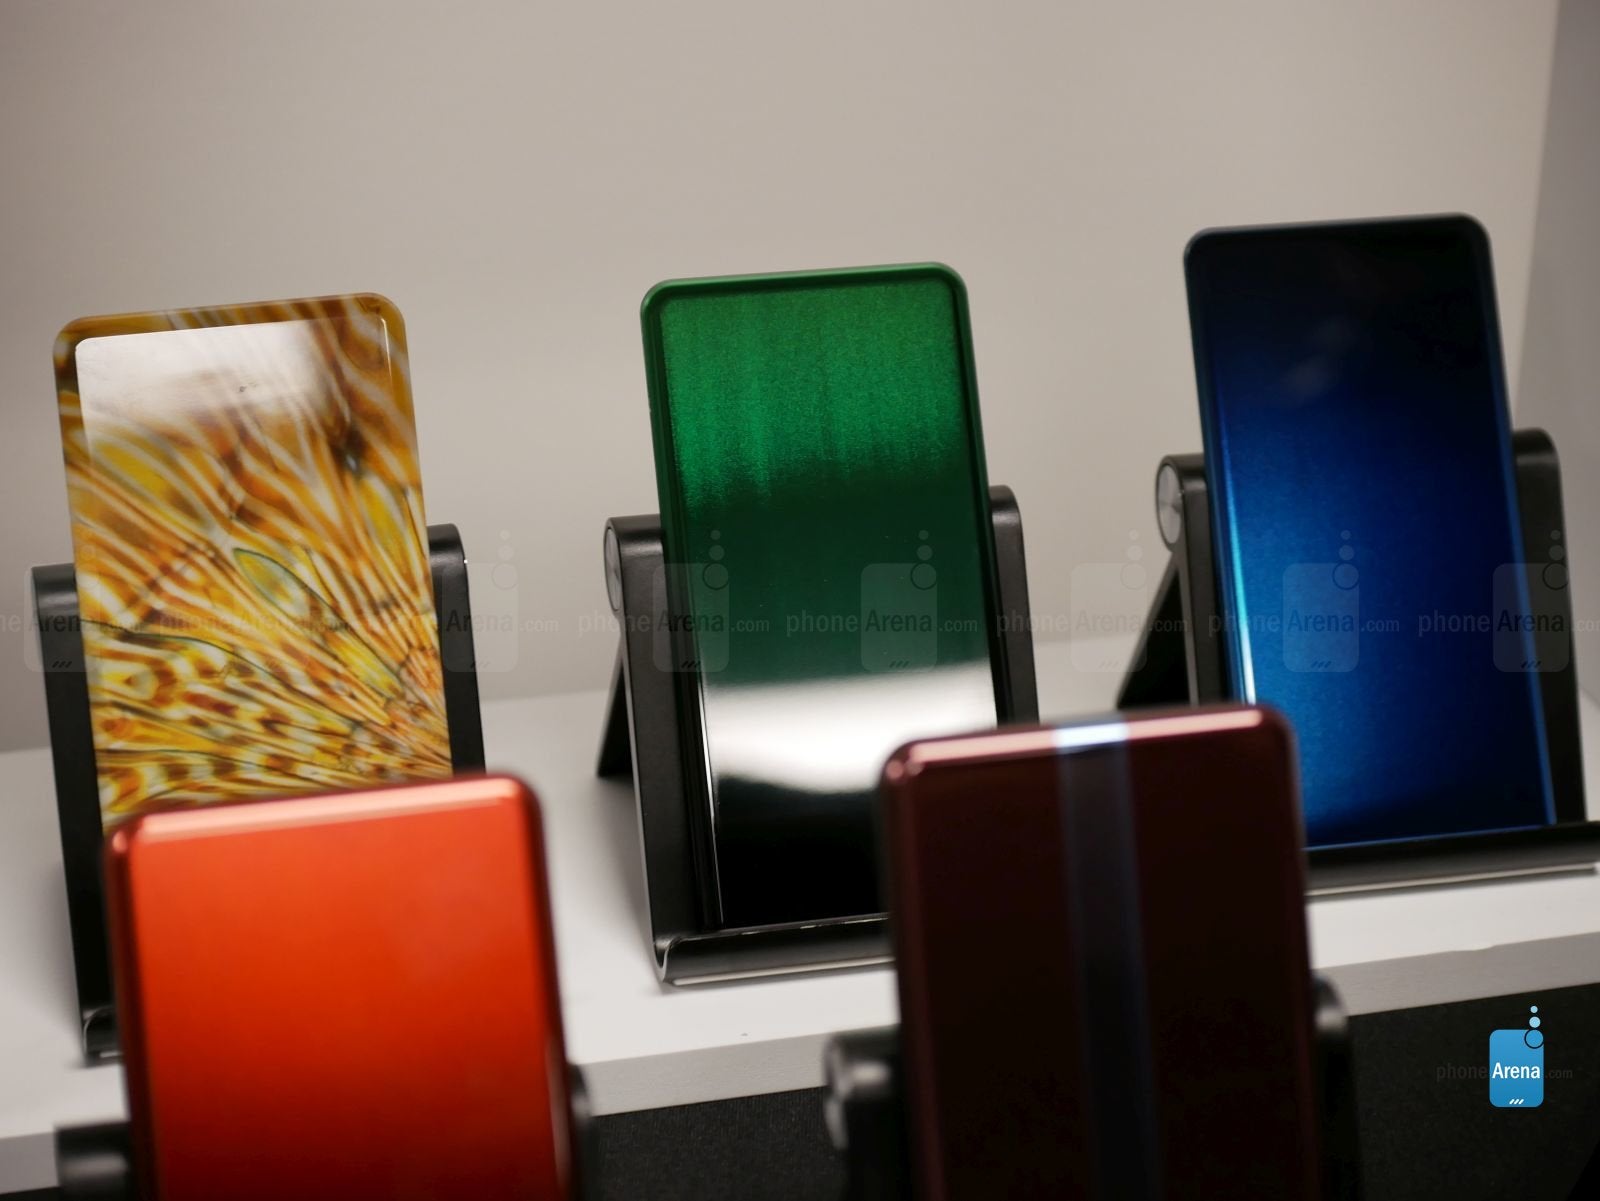 Corning's new inkjet technology allows them to print images on a piece of glass, with some offering unique textures to emulate the look and feel of real-life materials such as wood. - Corning's Technology Center tour: where glass innovations are born